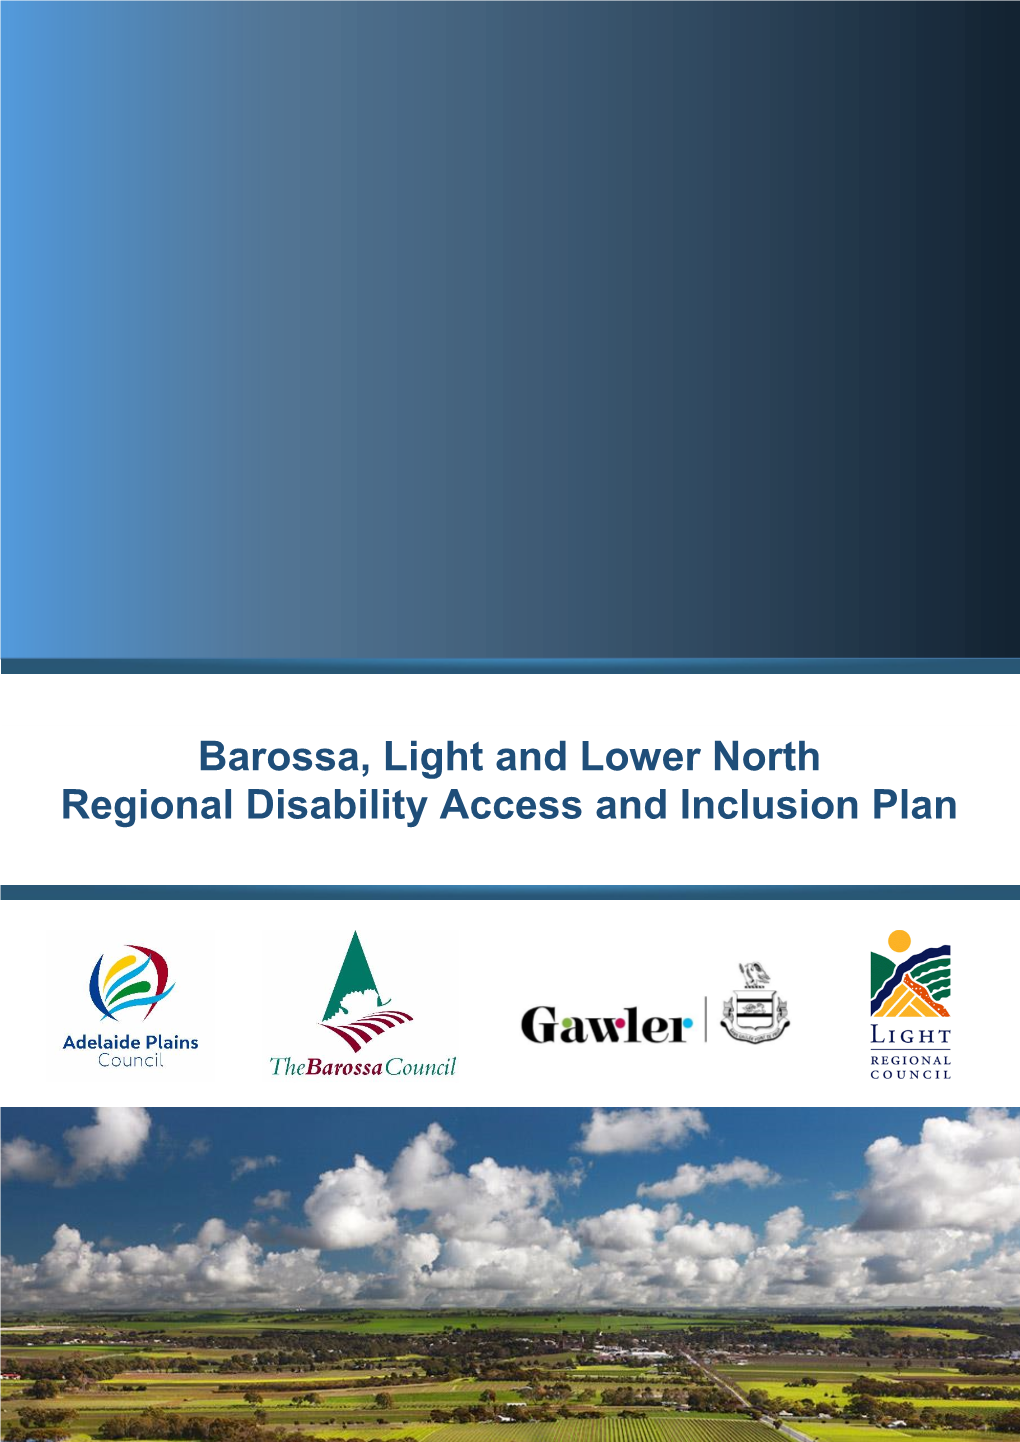 Barossa, Light and Lower North Regional Disability Access and Inclusion Plan Project Team